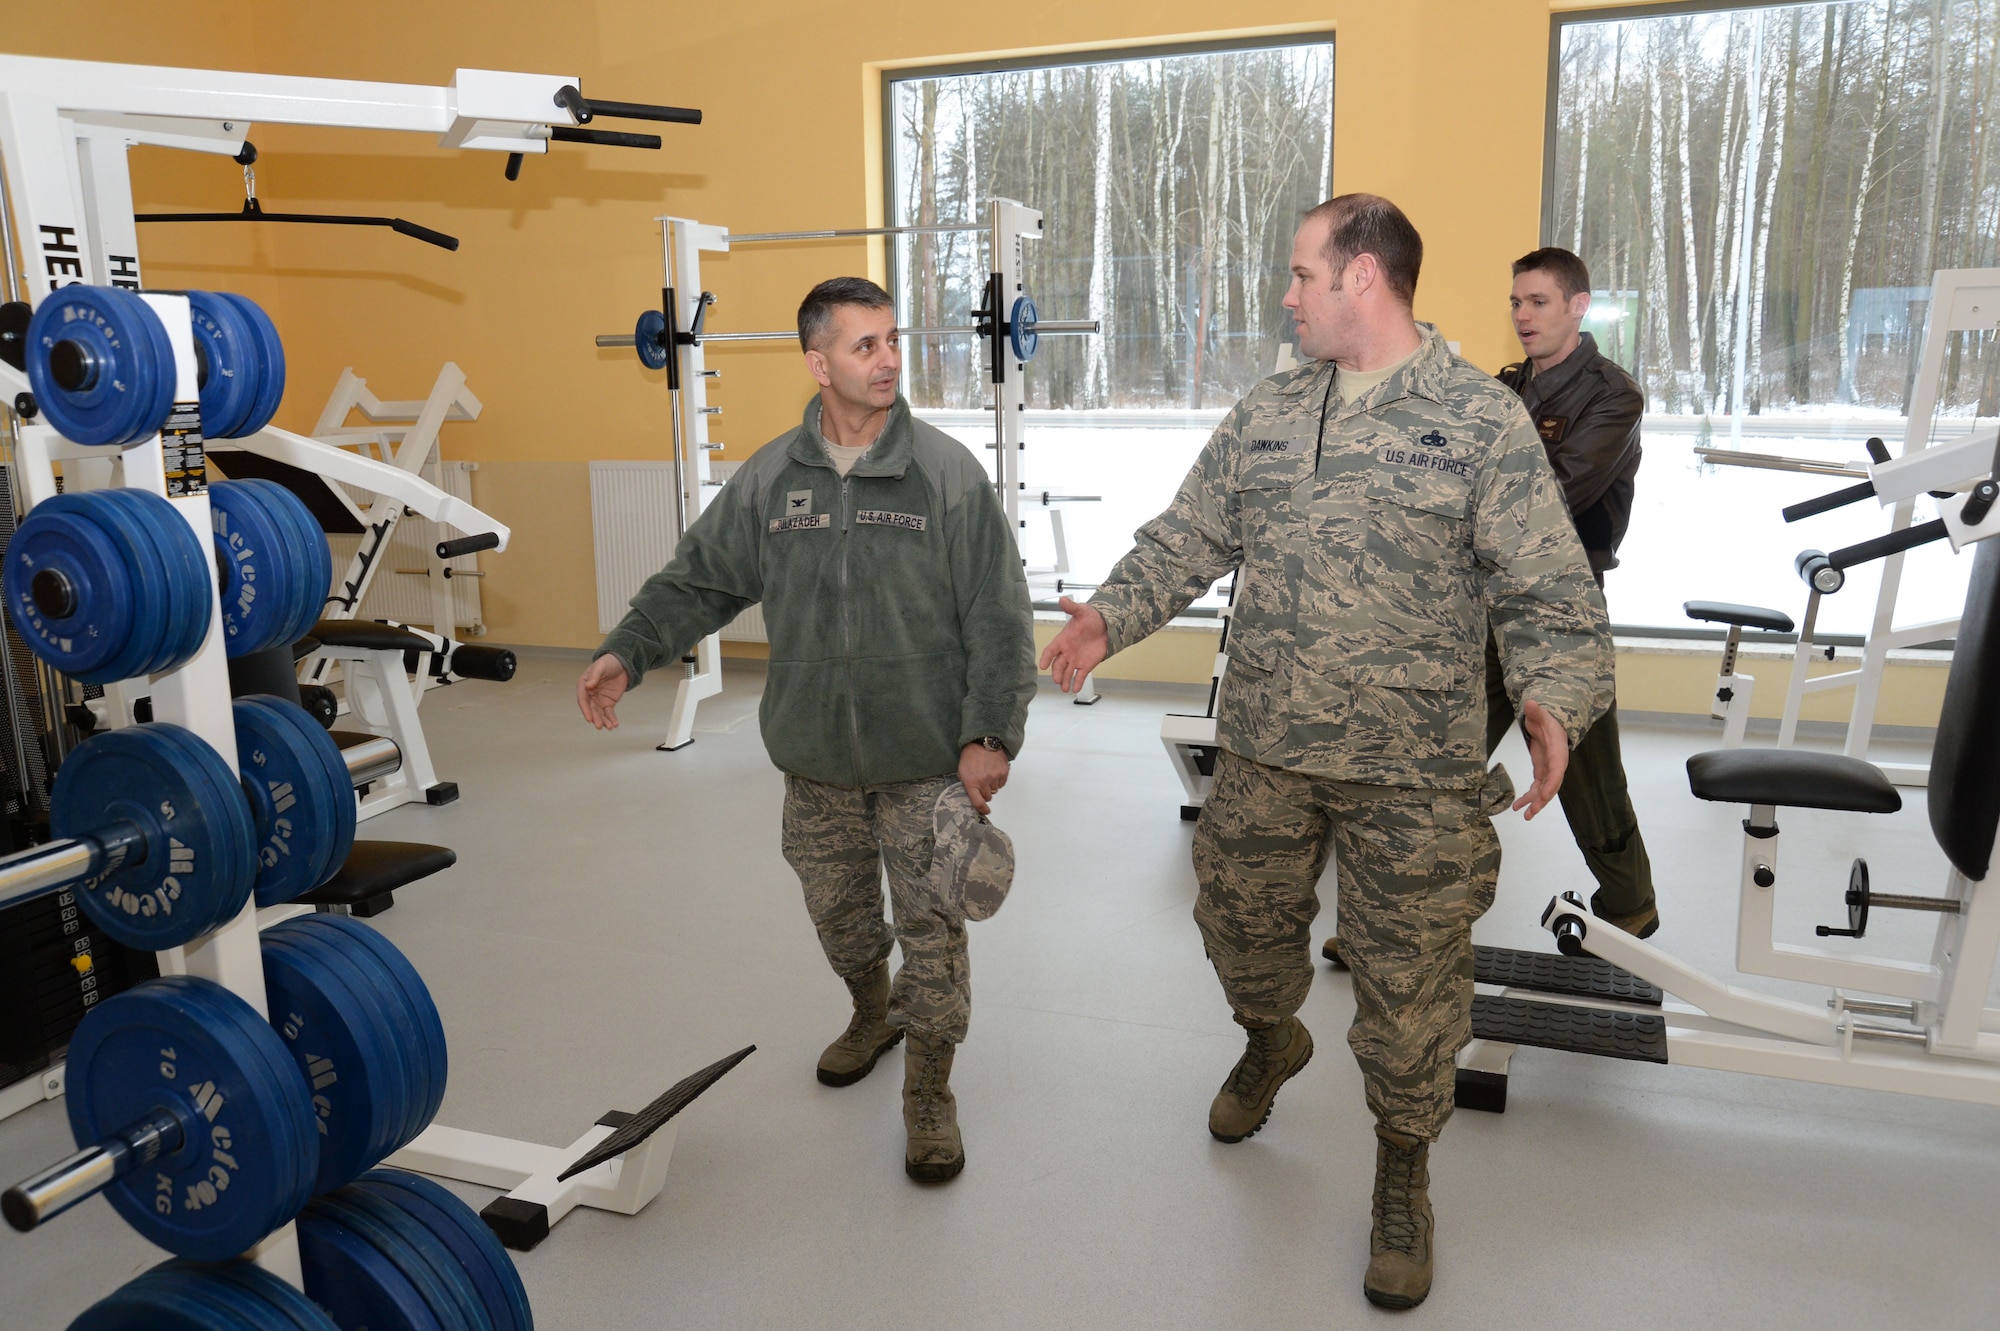 U.S. Air Force Col. David Julazadeh, commander of the 52nd Fighter Wing, left, listens as Master Sgt. Mark Dawkins, Detachment 1, 52nd Operations Group maintenance operations liaison, gives a tour of the fitness center at Lask Air Base, Poland, Jan. 29, 2014. Wing leadership toured the Polish installation's fitness center, swimming pool, obstacle course and indoor/outdoor tracks used by both Polish and American Airmen -- a shared usage also in line with the detachment's motto "Razem Silniejsi," meaning "Stronger Together" in Polish. (U.S. Air Force photo by Staff Sgt. Joe W. McFadden / Released)